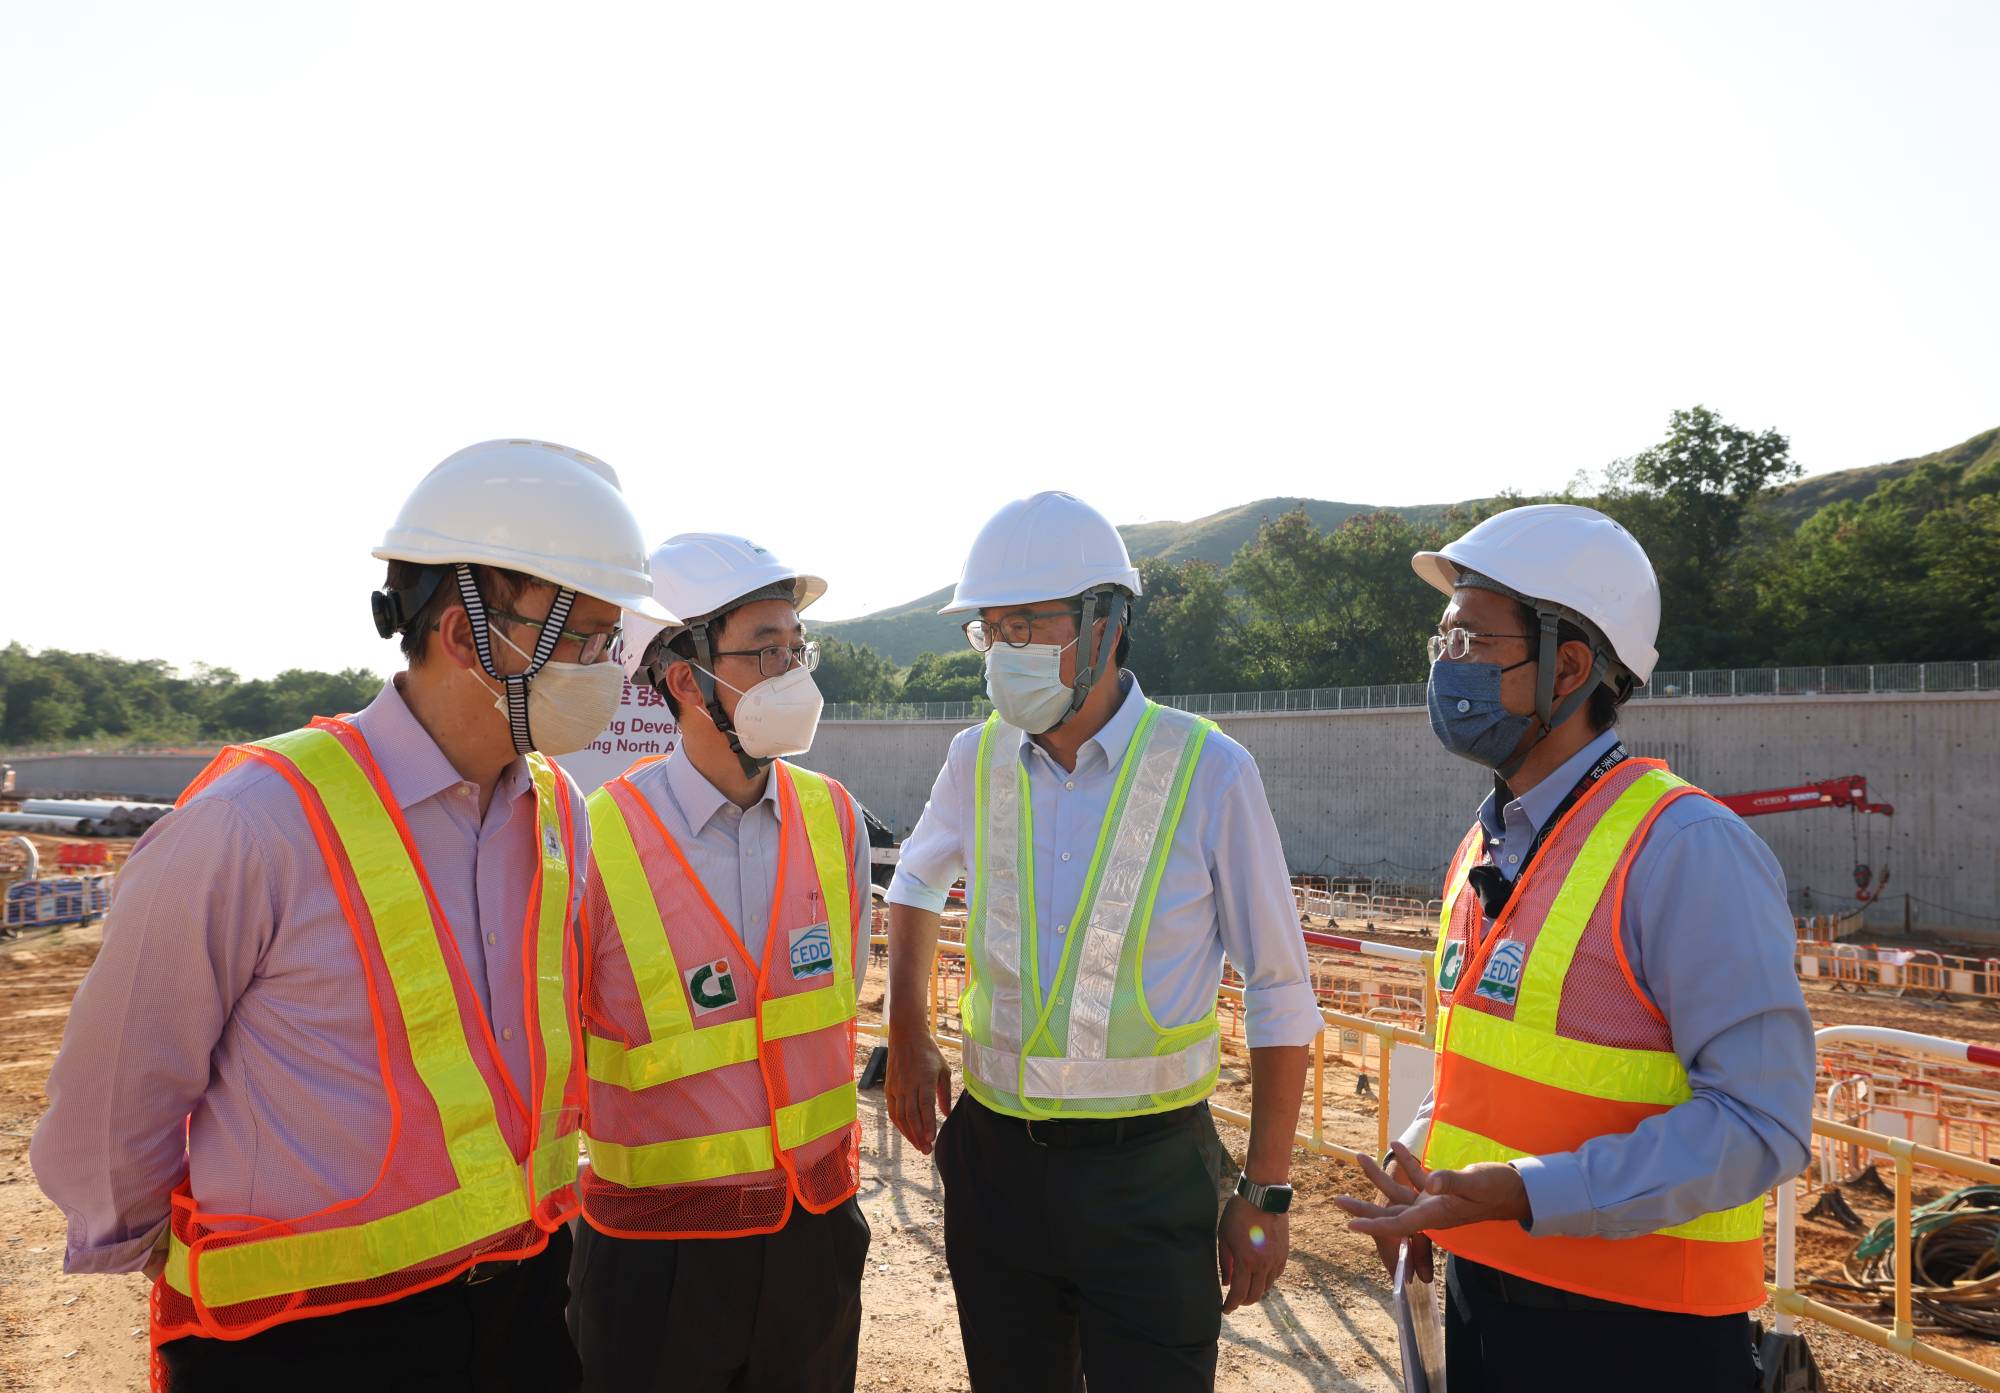 Accompanied by the Project Manager (North) of the North Development Office of the Civil Engineering and Development Department (CEDD), Mr LAI Cheuk-ho (second left), and the Chief Engineer of the North Development Office of the CEDD, Mr CHO Wai-hung, Mike (first right), the Secretary for Development (SDEV), Mr WONG Wai-lun, Michael (second right), and the Under Secretary for Development, Mr LIU Chun-san (first left) inspect the works progress in the Kwu Tung North/Fanling North (KTN/FLN) New Development Area (NDA).